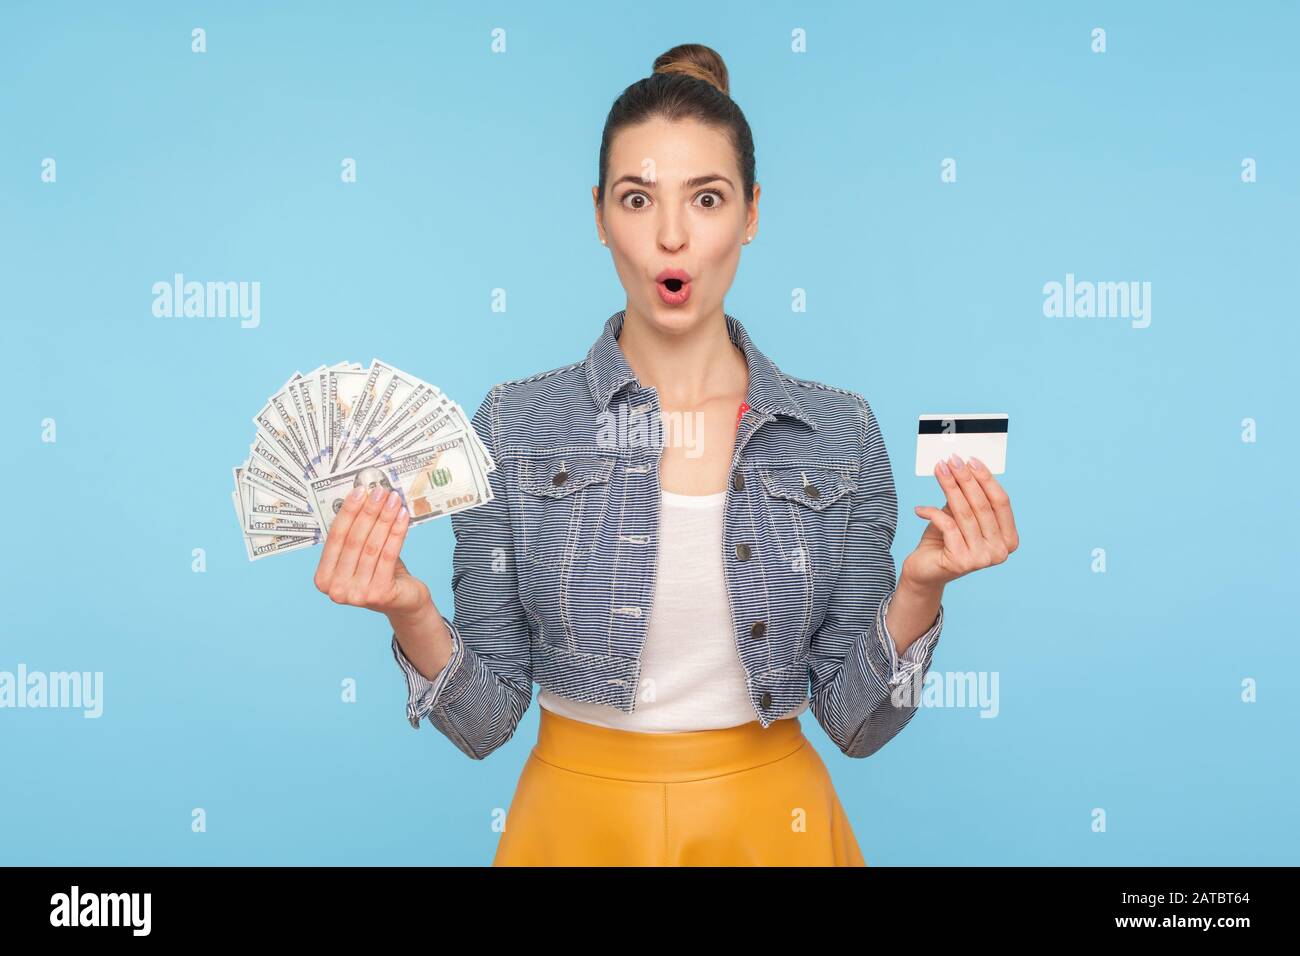 Wow, high-interest loan! Portrait of delighted and surprised woman holding credit card and dollar banknotes, looking with amazement shock at camera. i Stock Photo